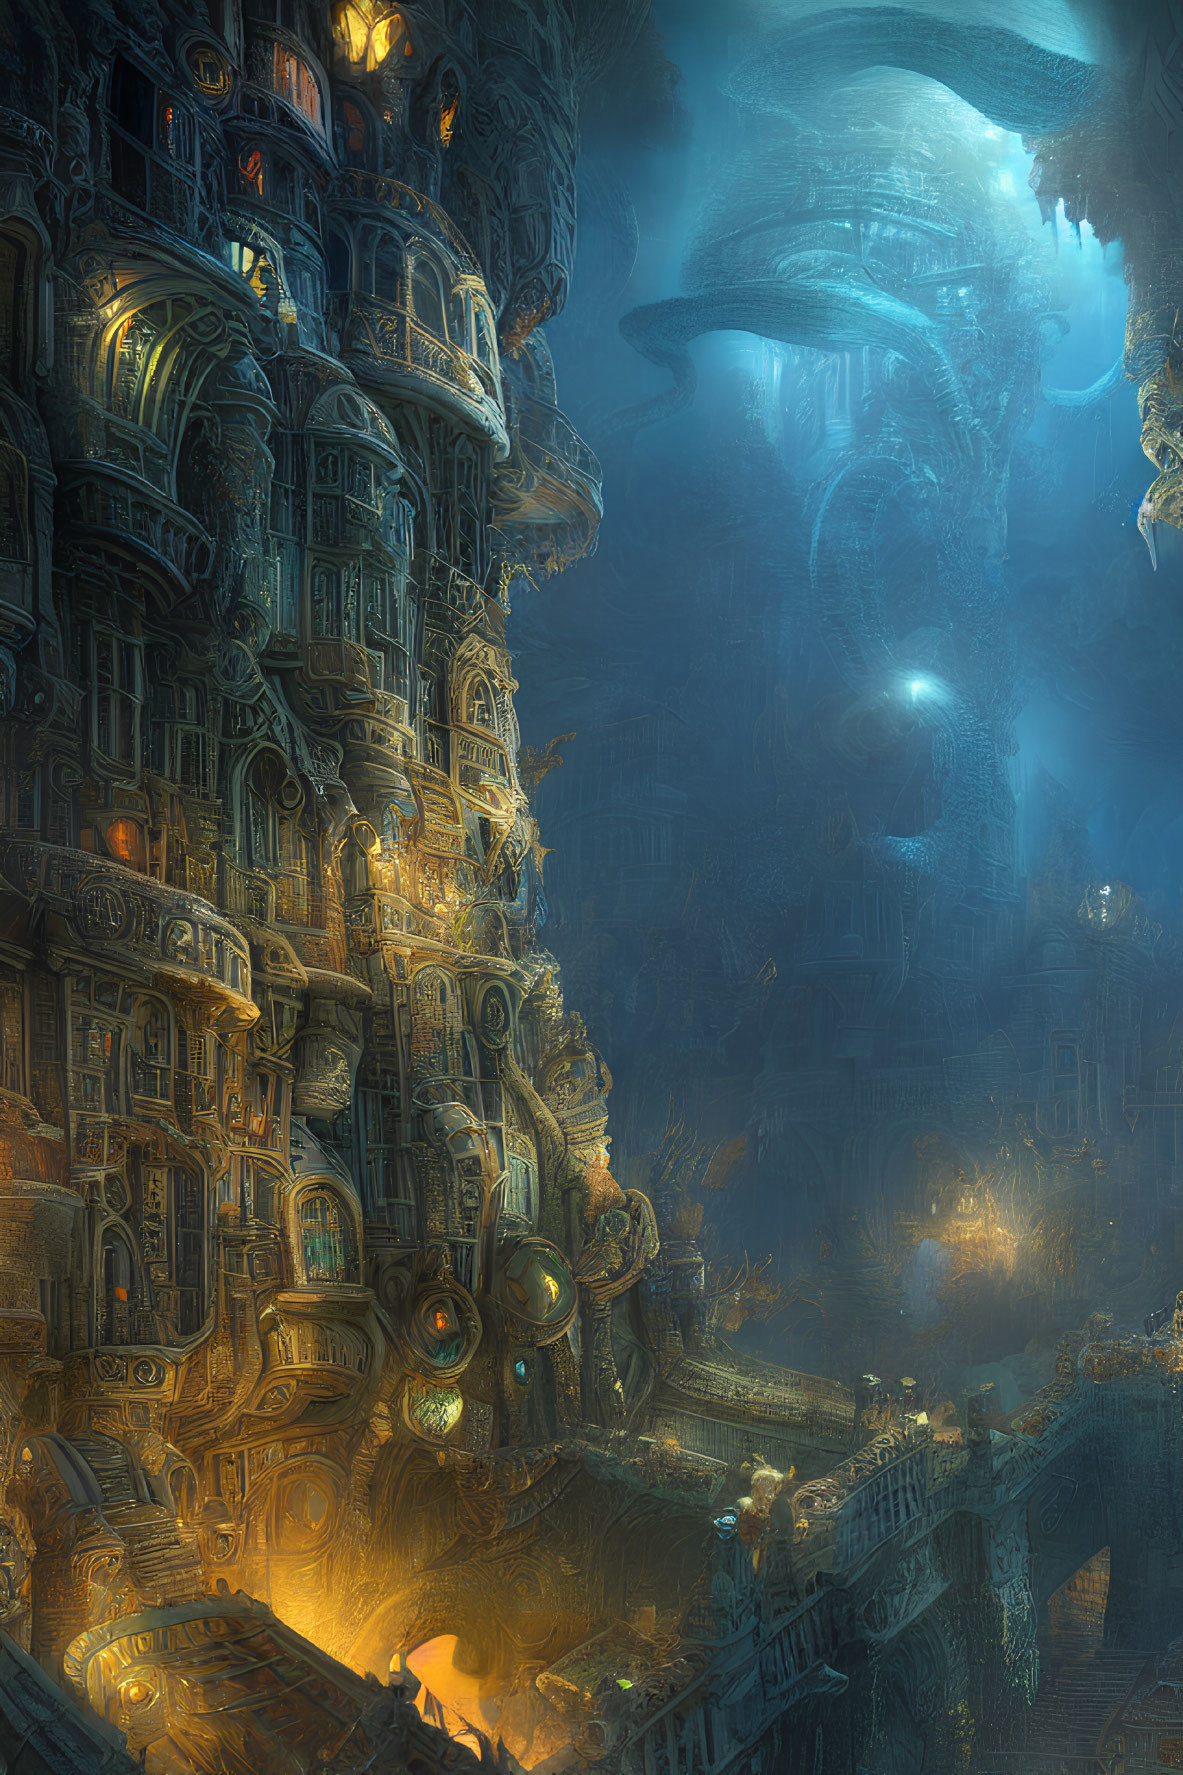 Luminous fantasy cityscape with intricate details under cavernous ceiling